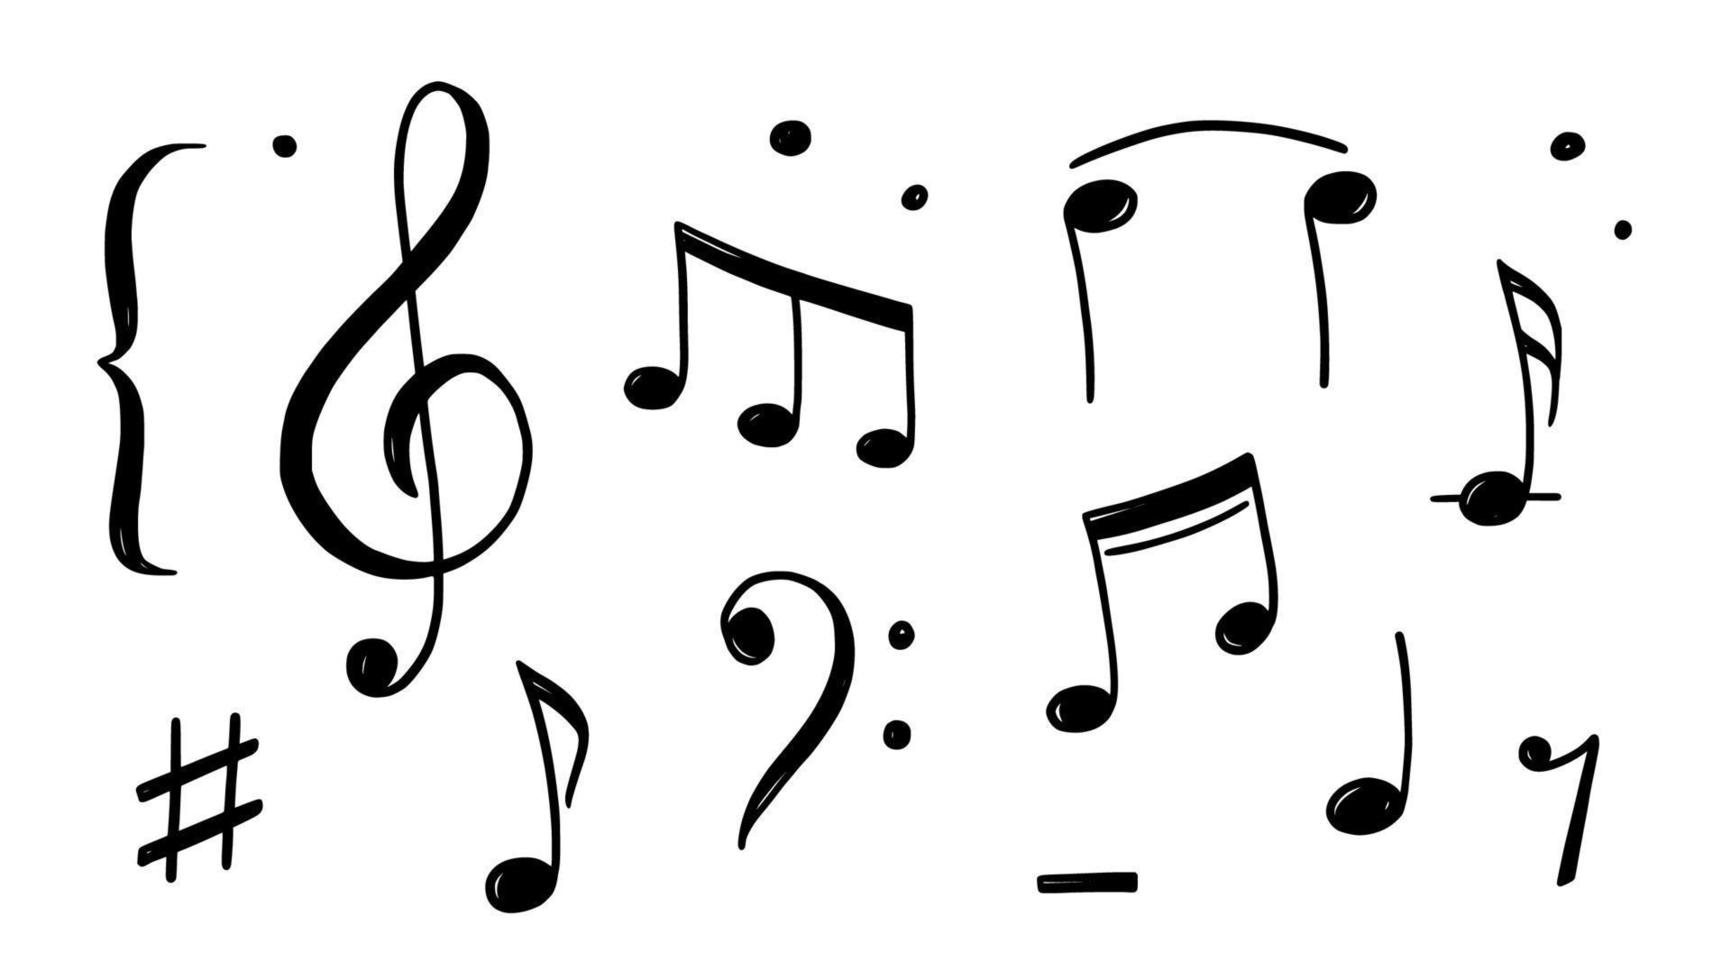 Music note doodle drawn style vector